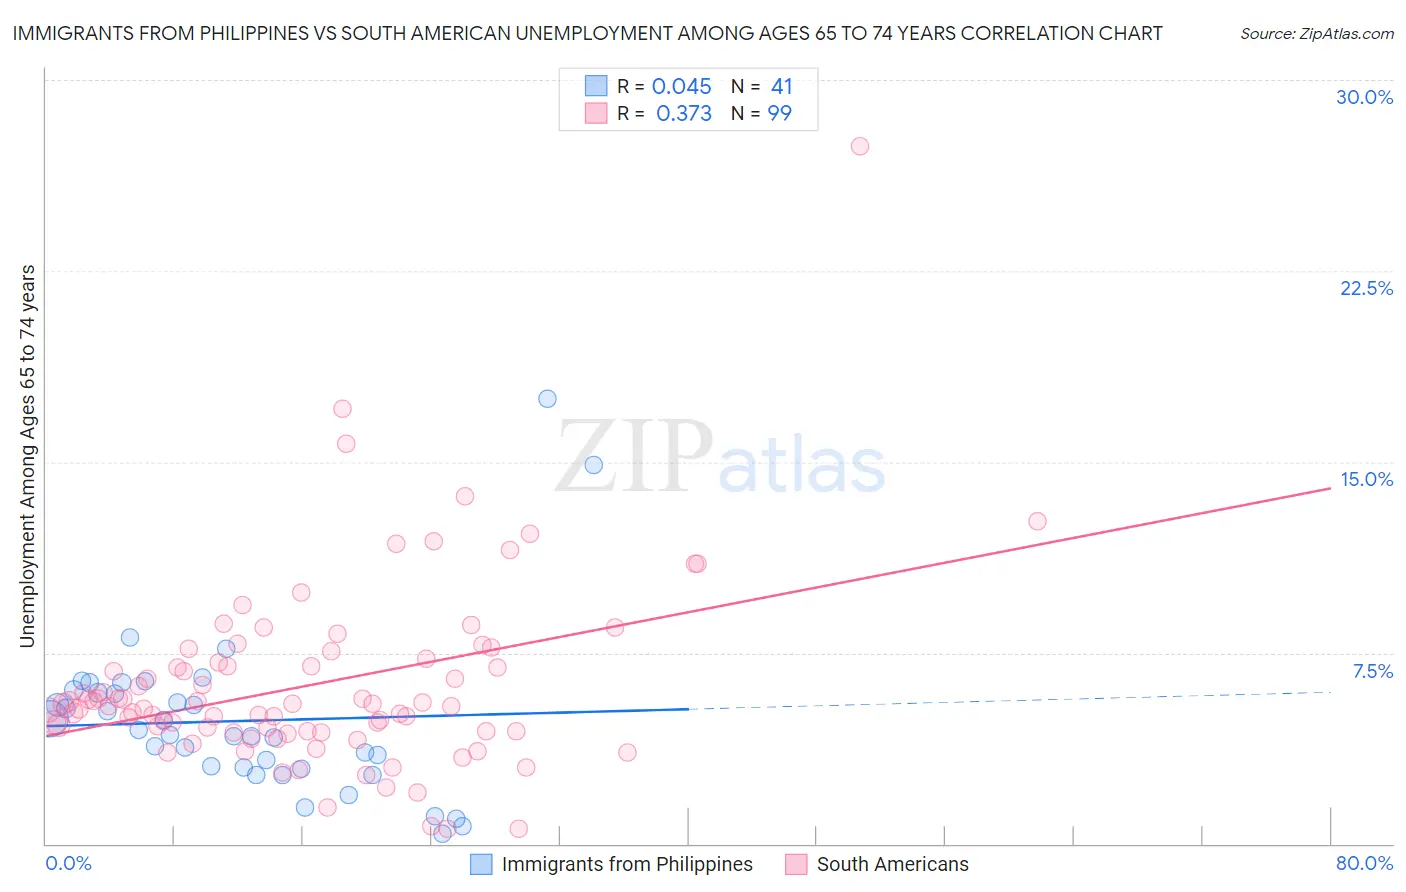 Immigrants from Philippines vs South American Unemployment Among Ages 65 to 74 years